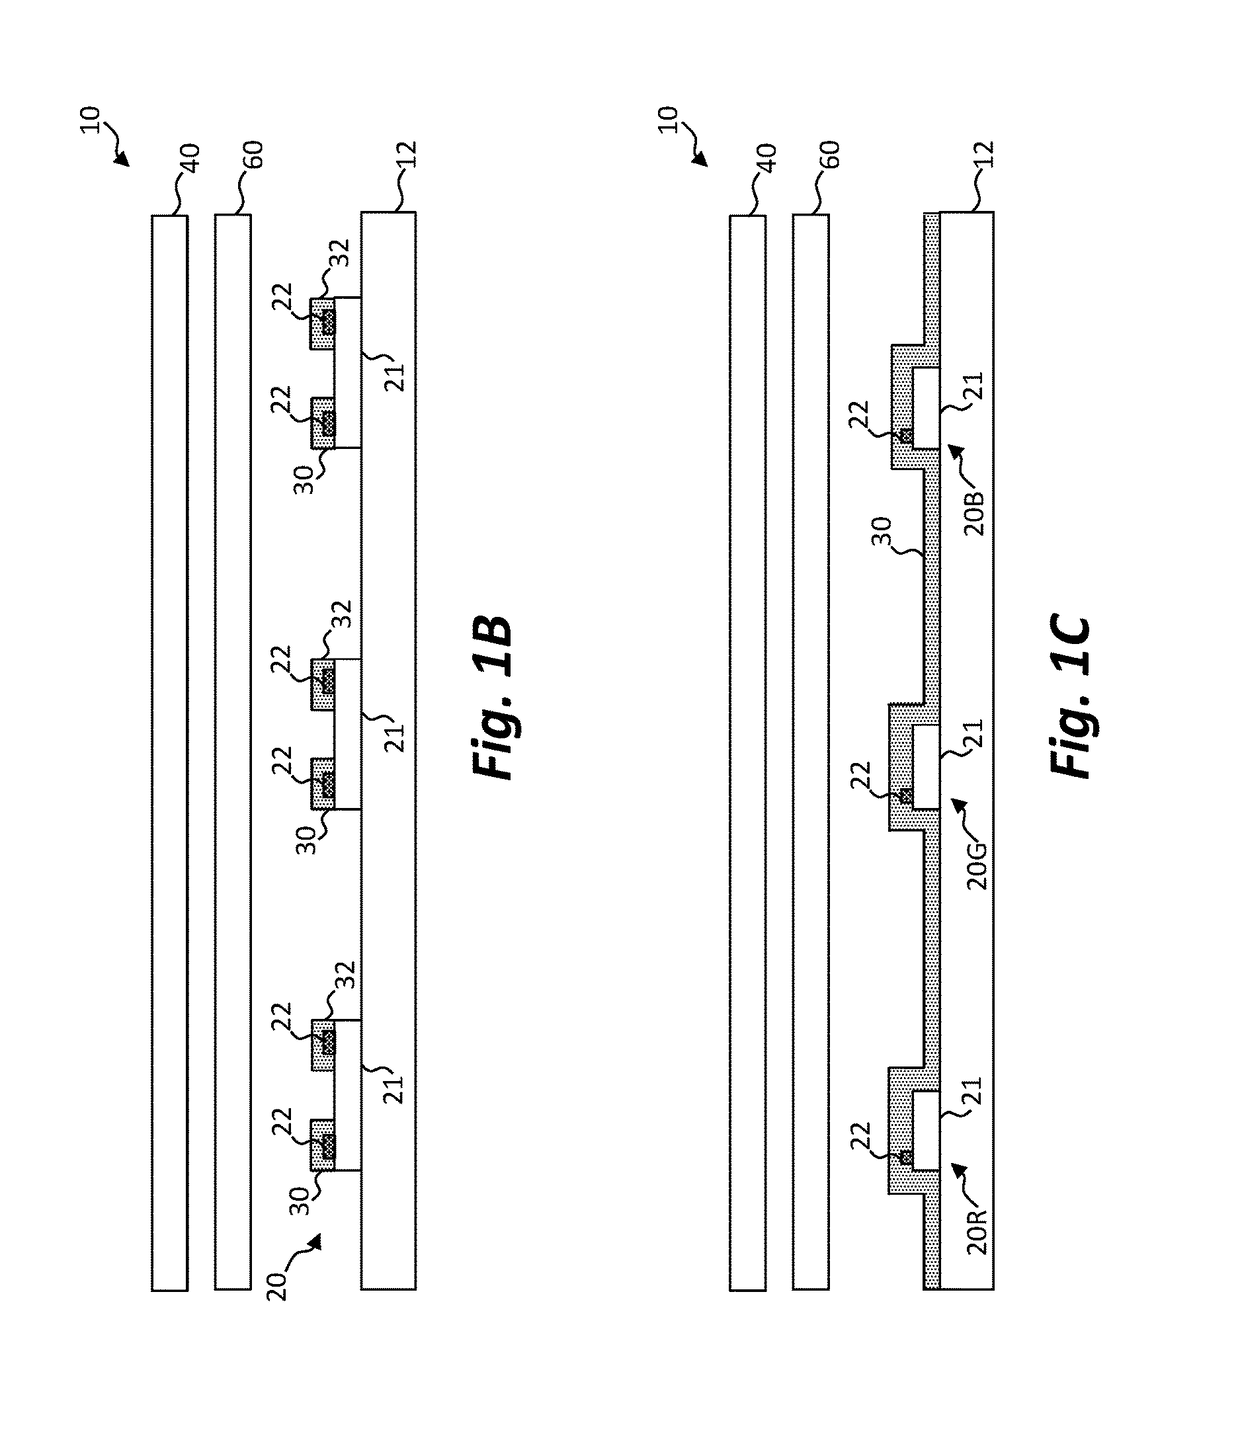 Micro-light-emitting diode backlight system